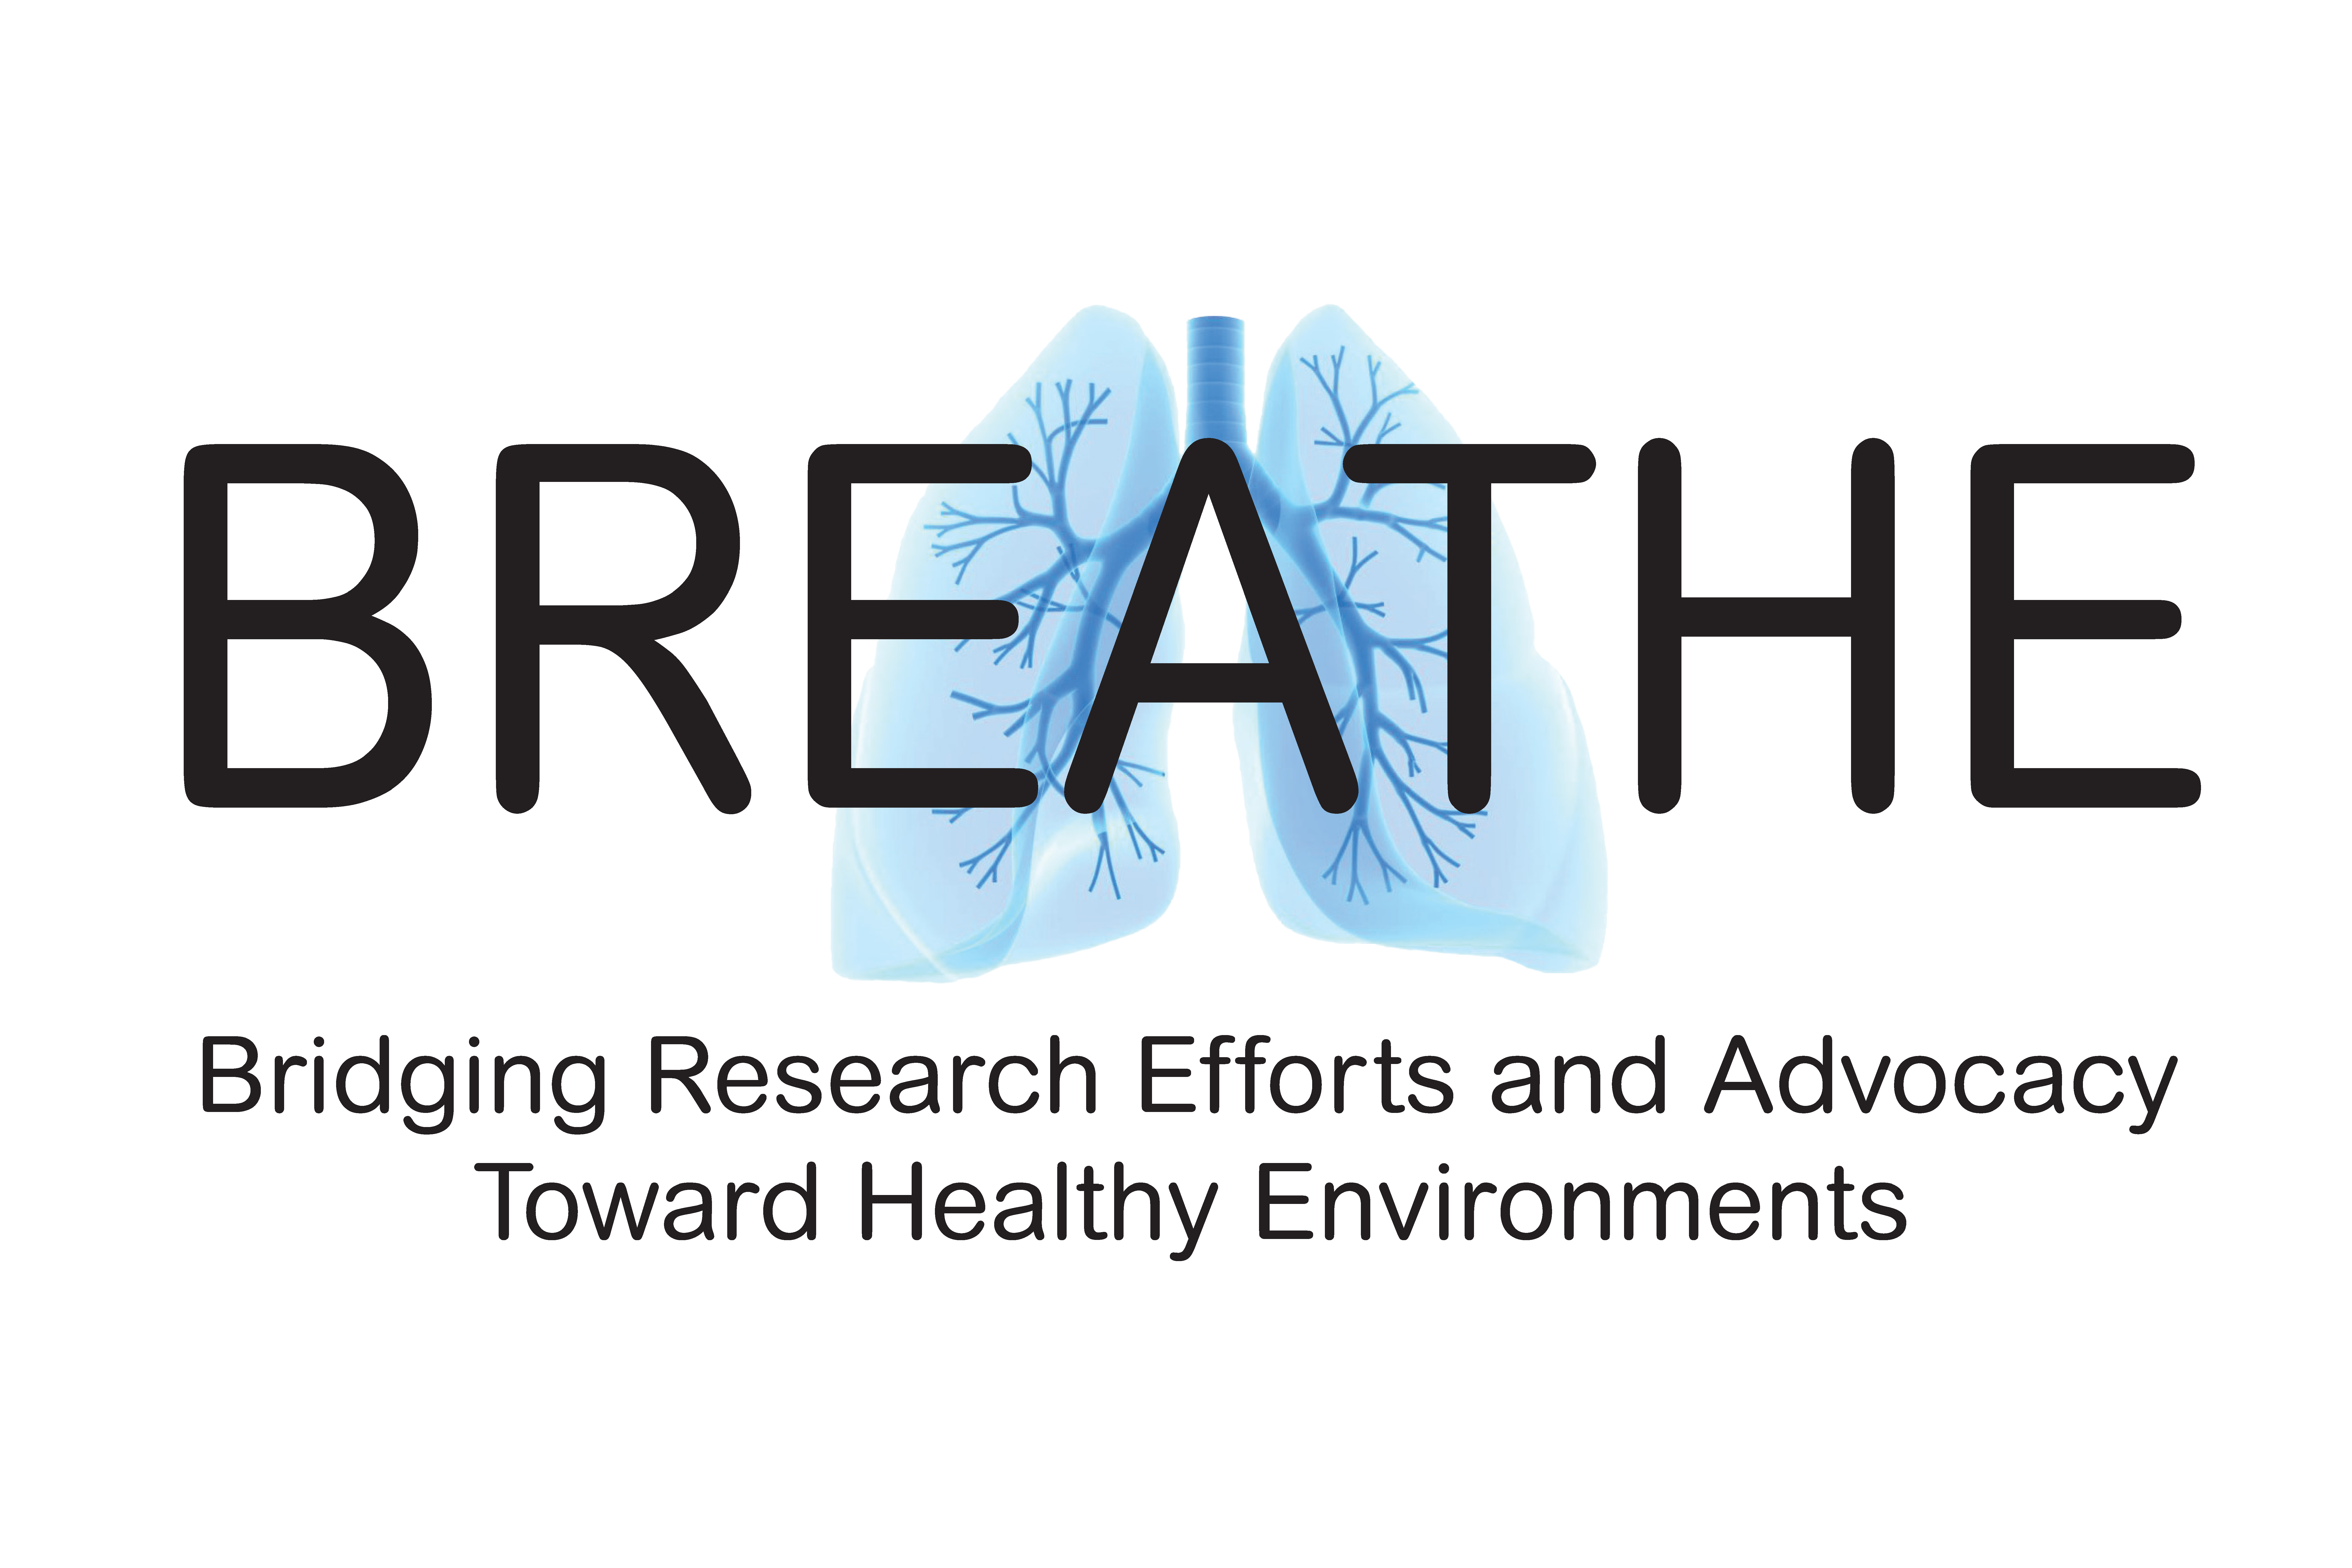 BREATHE logo that reads "Bridging Research Efforts and Advocacy Toward Healthy Environments